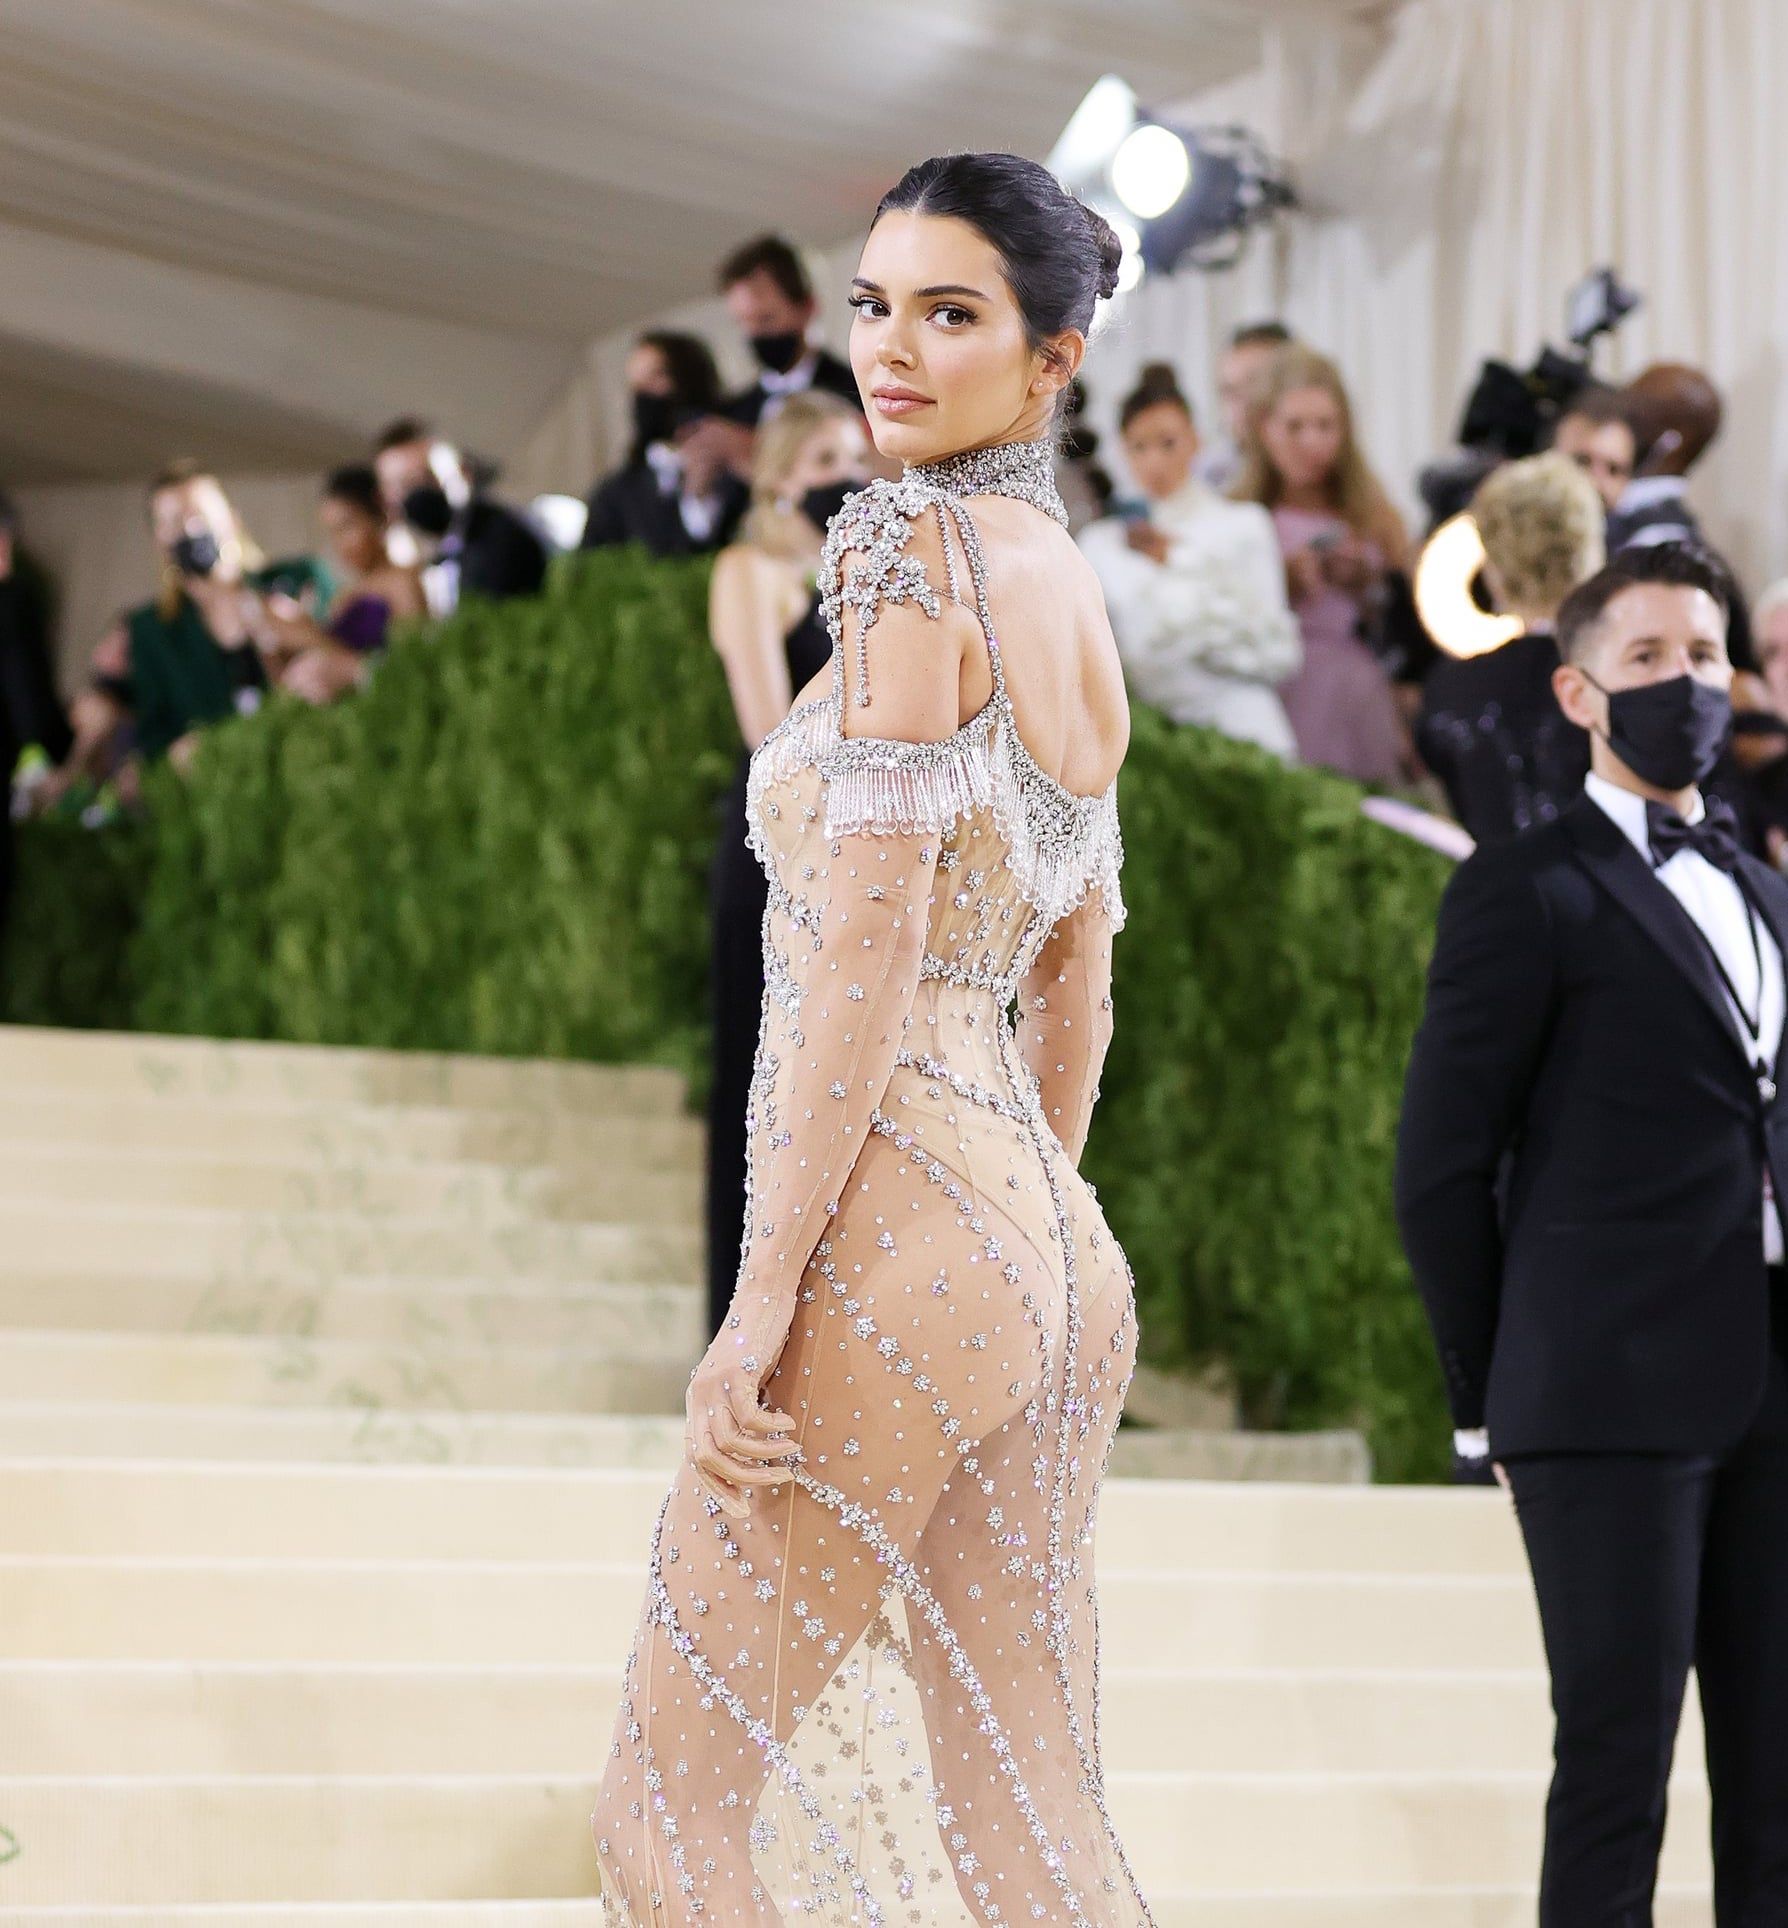 Kendall Jenner champions the naked dress trend at the 2021 Met Gala